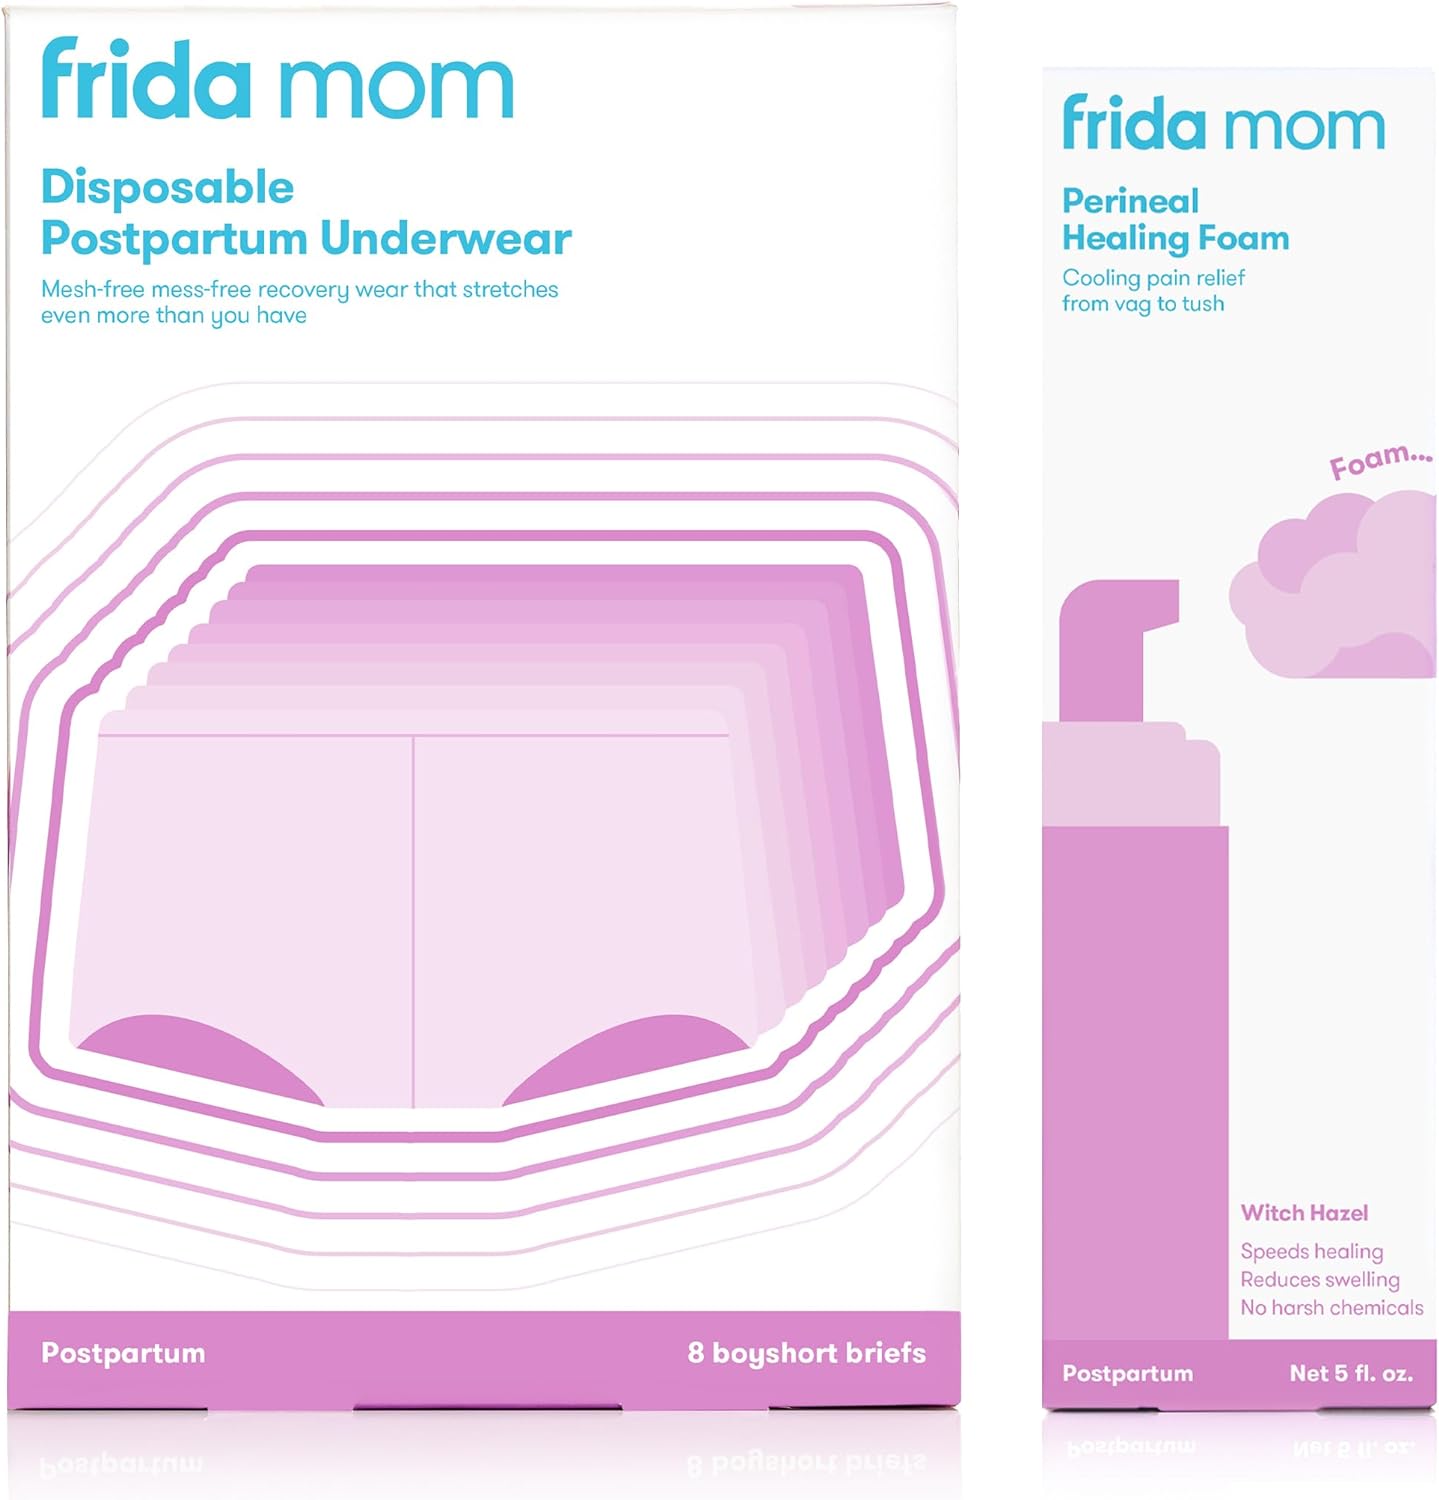 Frida Mom Perineal Medicated Witch Hazel Healing Foam for Postpartum Care, Relieves Pain and Reduces Swelling, White, 5 Fl Oz